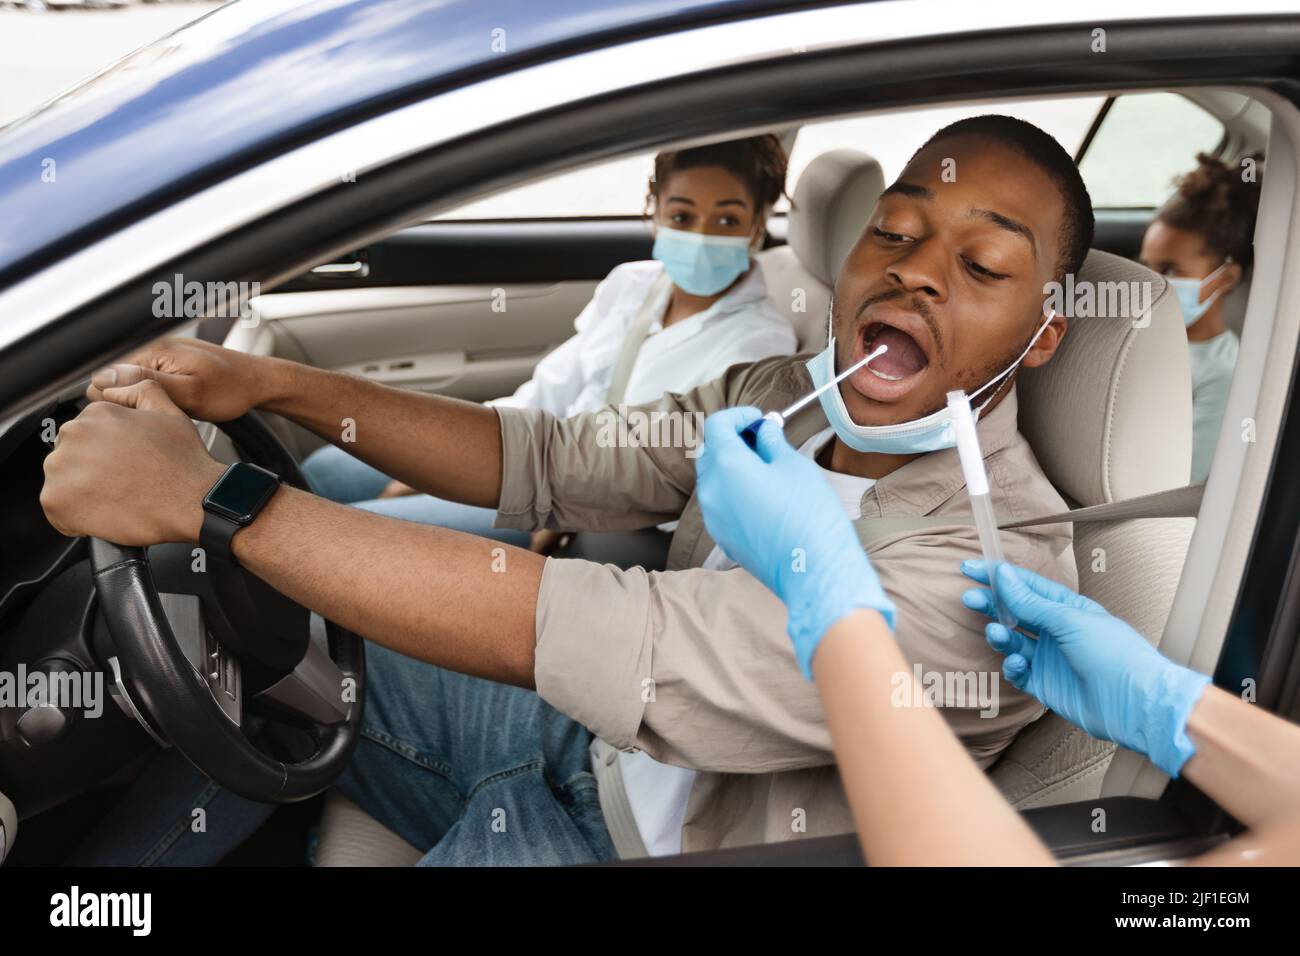 Black Male Driver Getting Tested For Covid-19 Sitting In Automobile Stock Photo